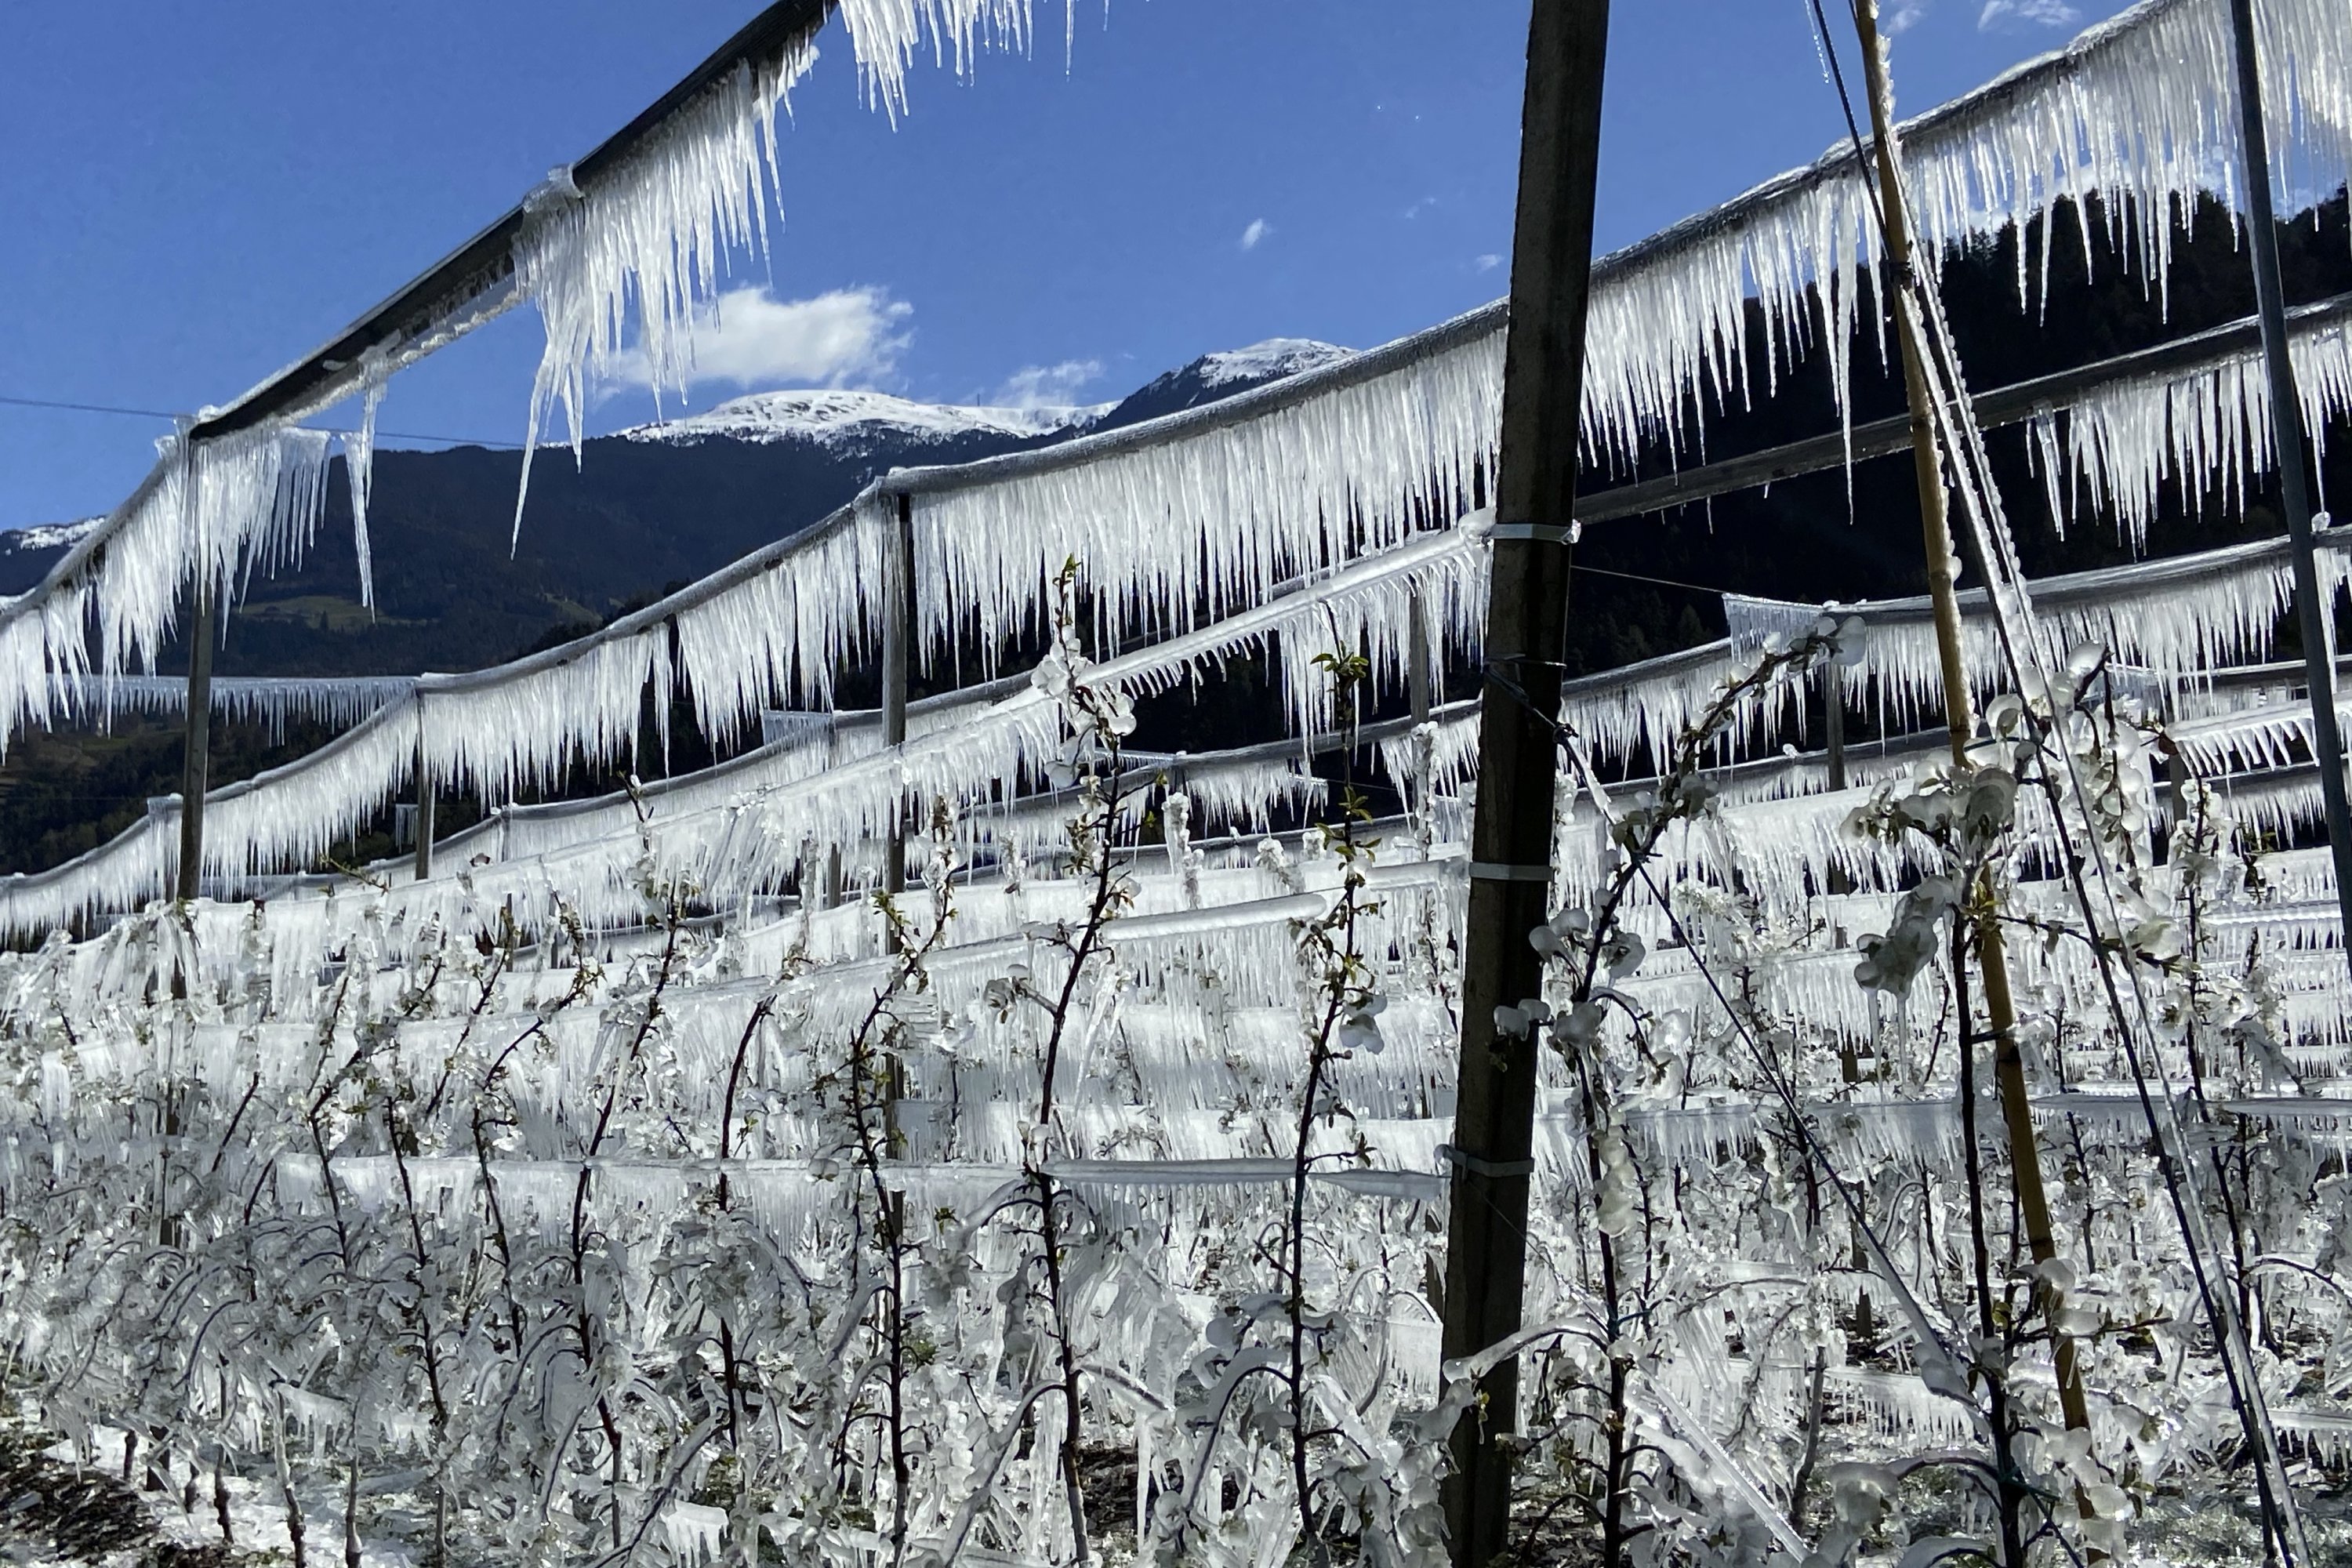 Artificially frozen apple trees covered with melting ice near Bressanone, in the northern Italian province of South Tyrol, Italy, on April 8, 2021. (AP Photo)